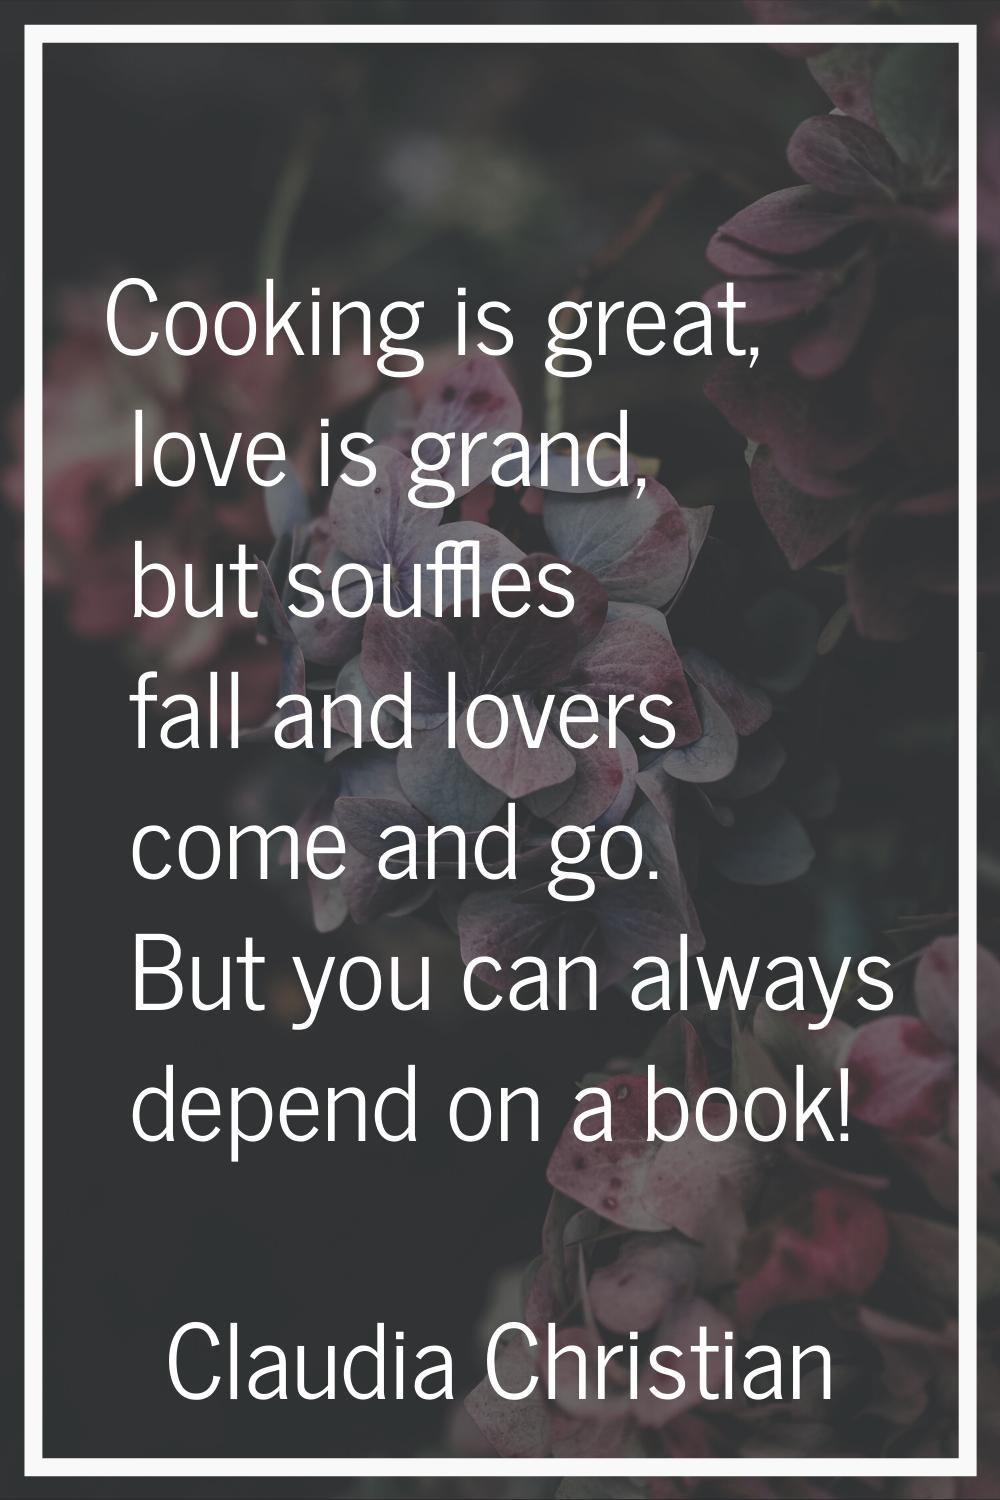 Cooking is great, love is grand, but souffles fall and lovers come and go. But you can always depen